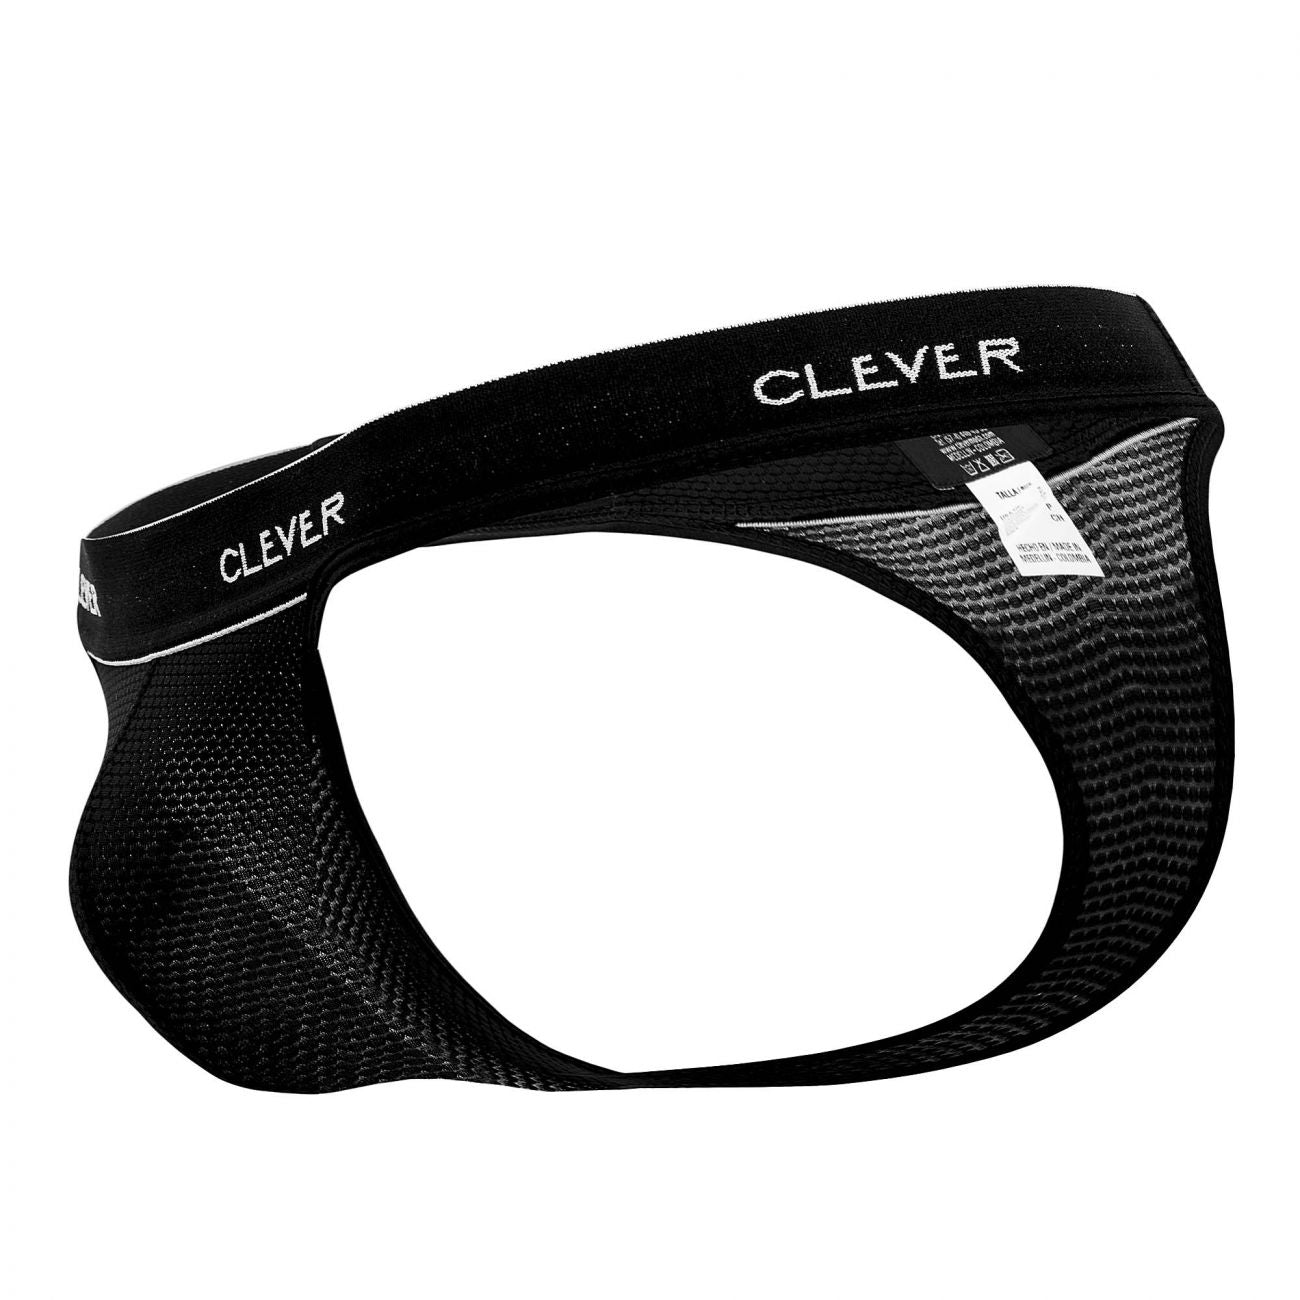 Clever 0569-1 Elements Thongs Black